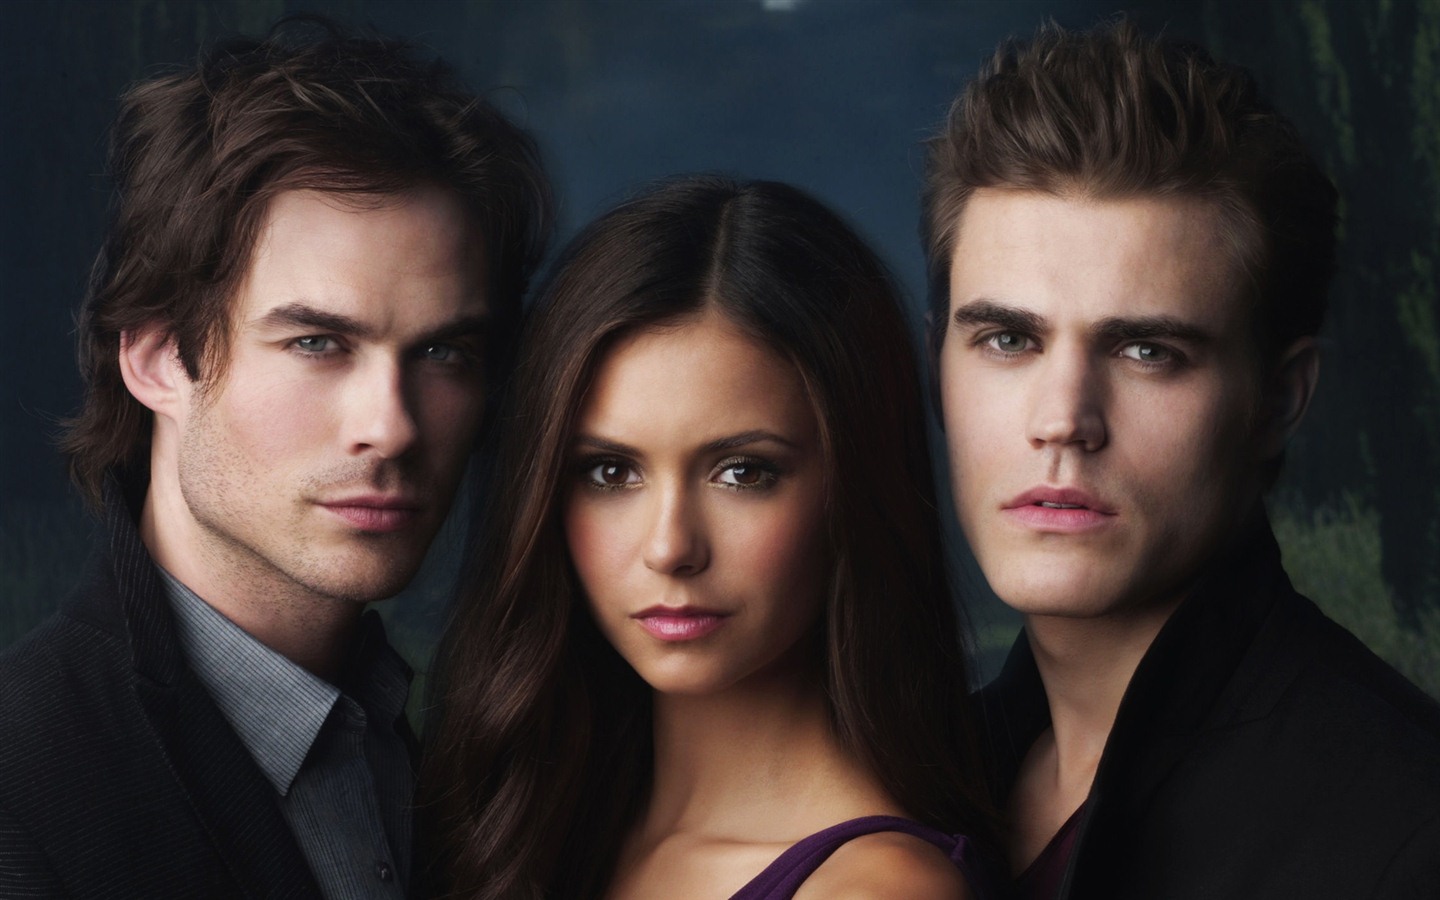 The Vampire Diaries HD Wallpapers #4 - 1440x900